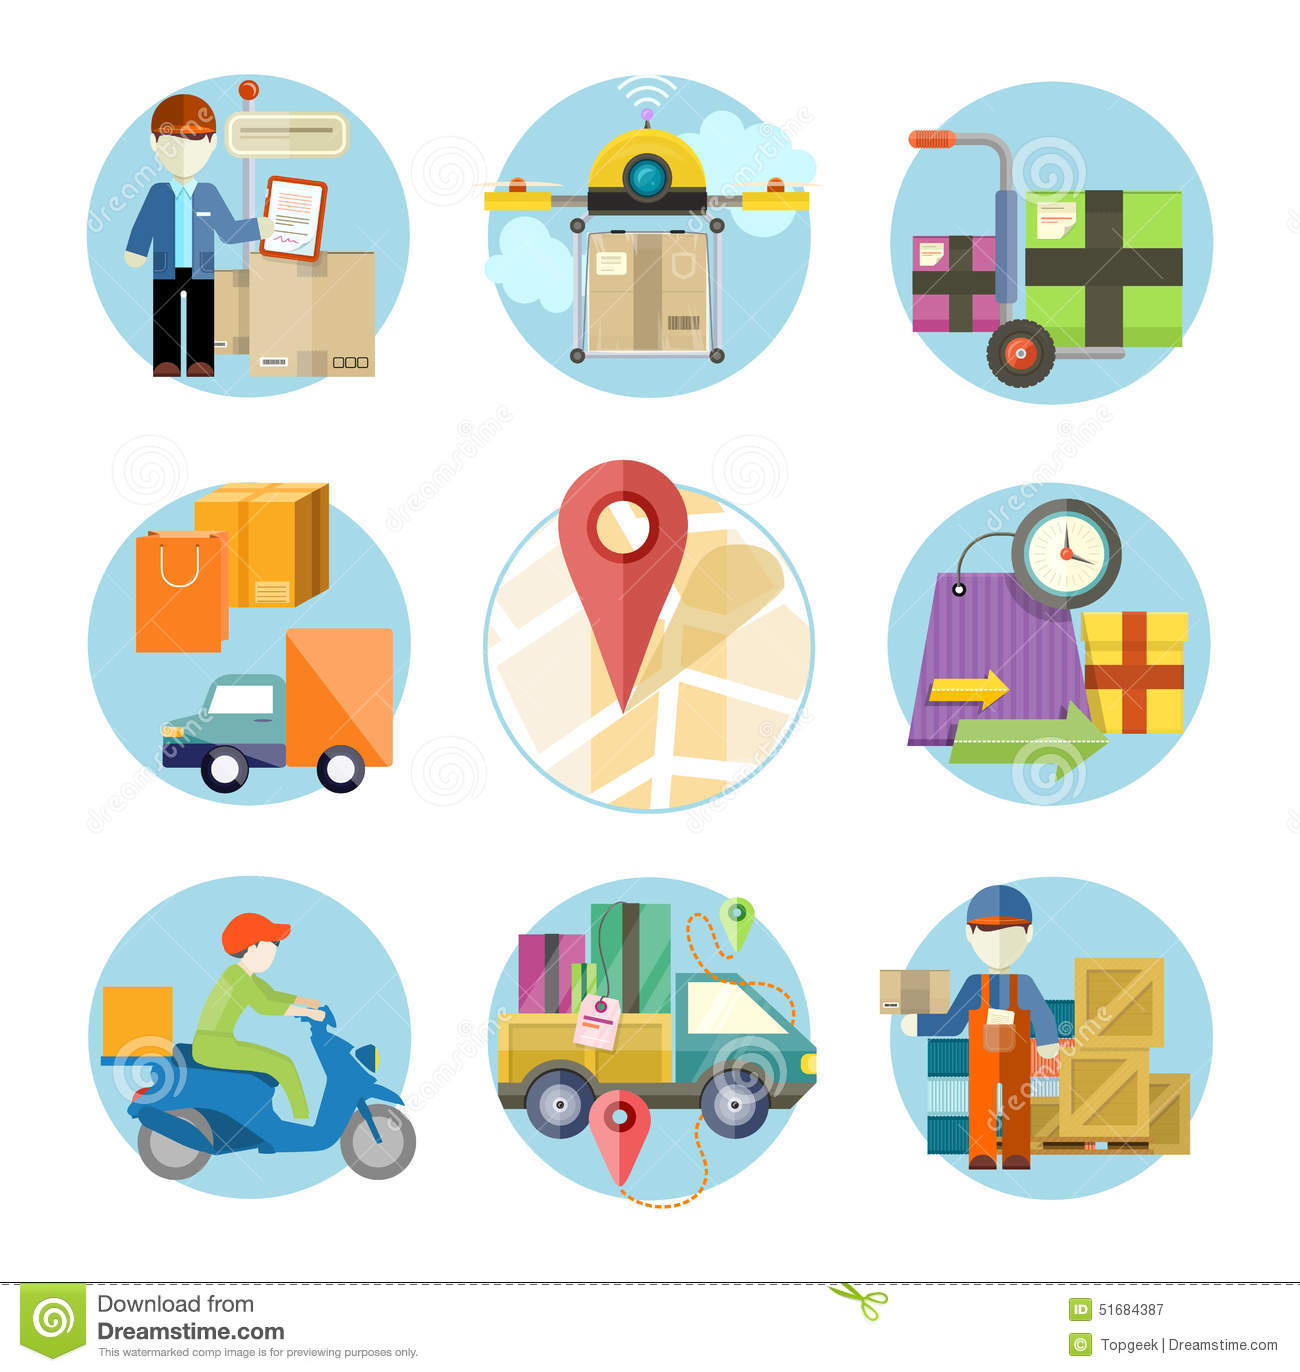 Goods and services clipart 1 » Clipart Station.